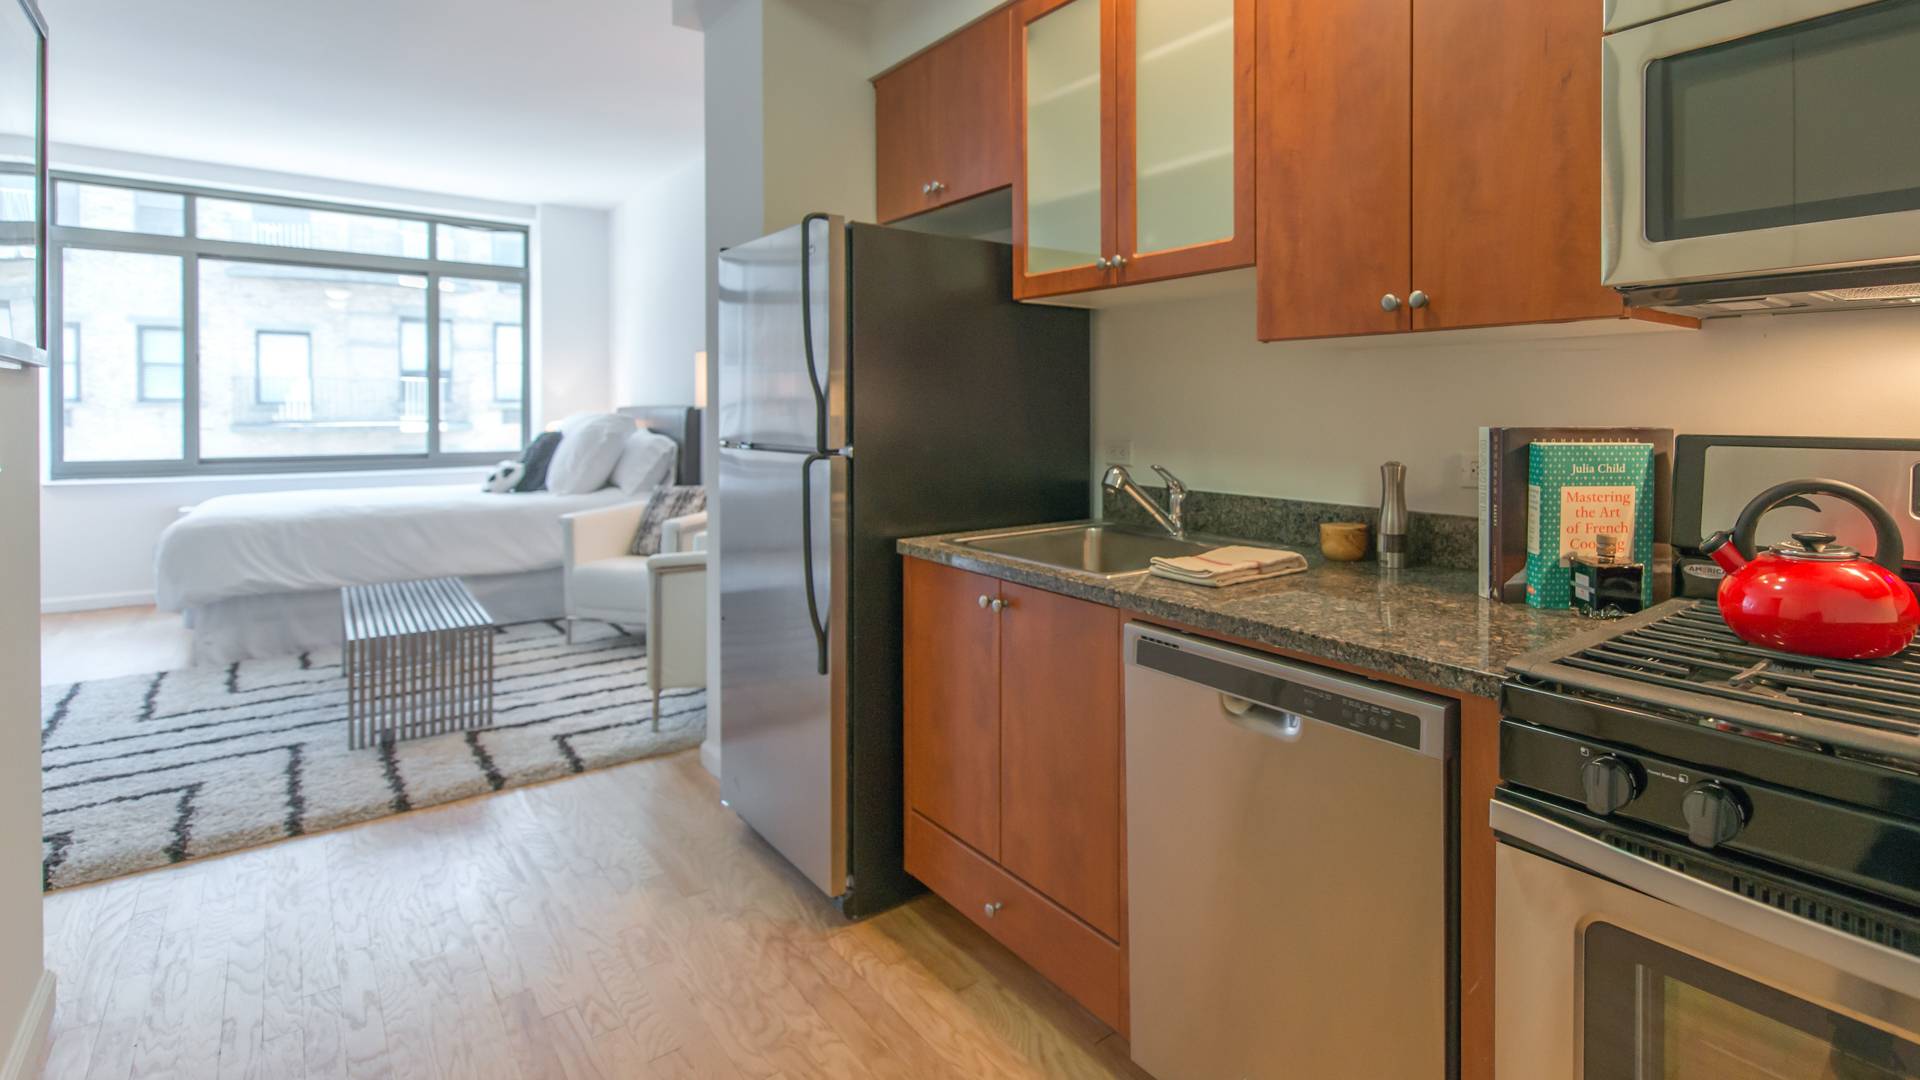 Splendid West Village Studio Apartment with 1 Bath featuring a Garage and Fitness Facility